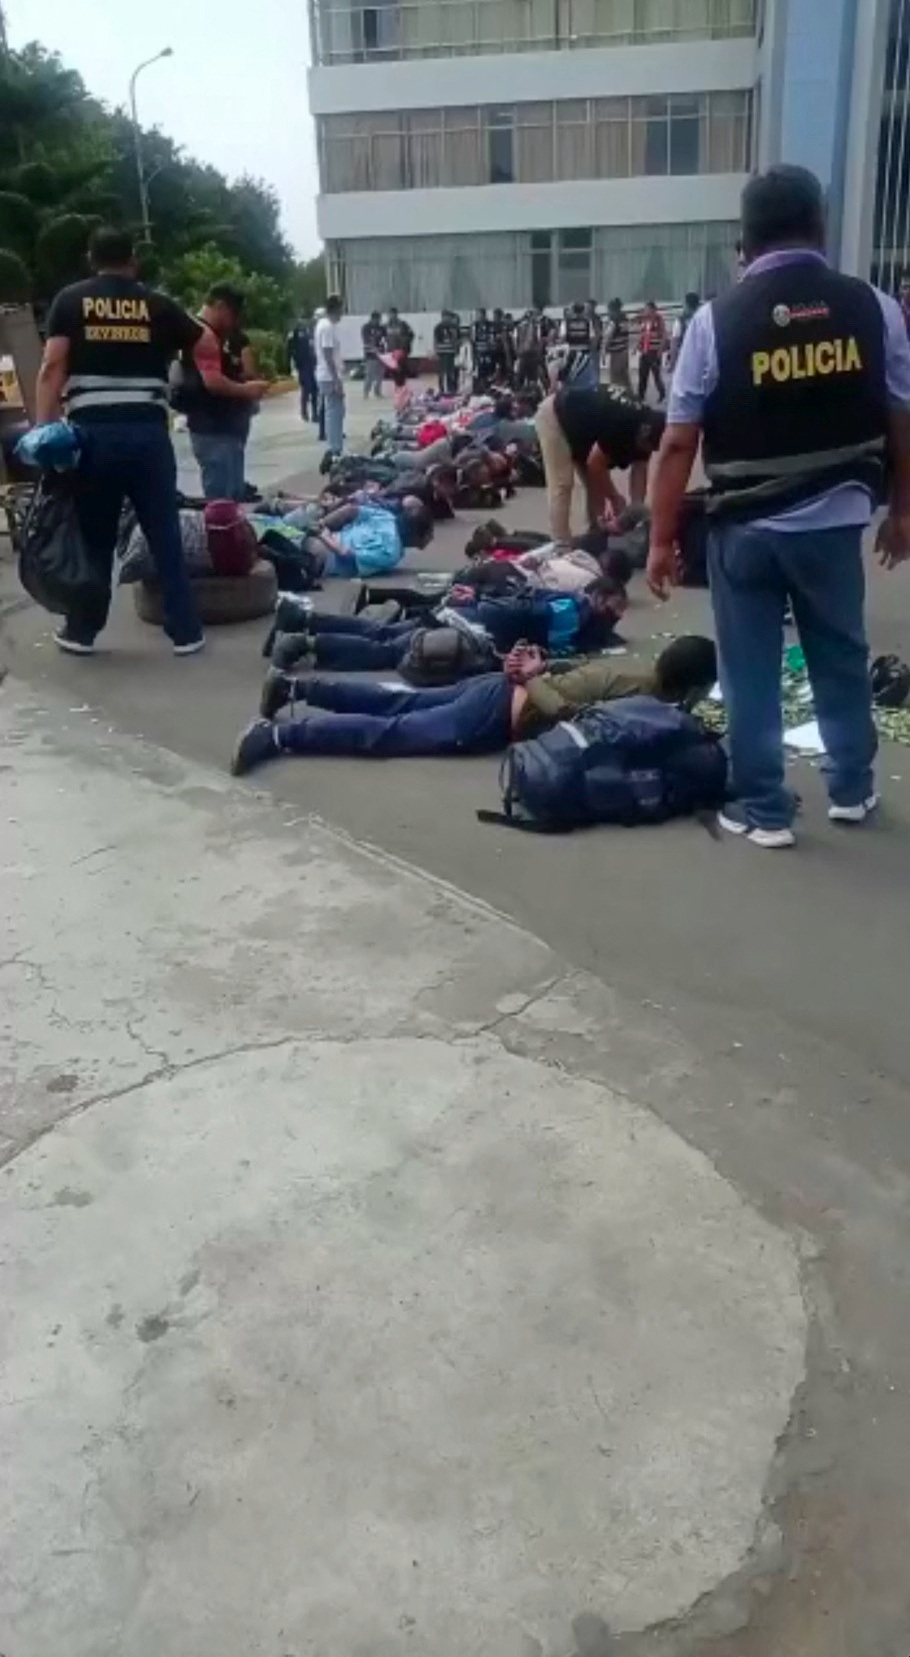 Police officers detain people at University San Marcos, in Lima, Peru January 21, 2023, in this screen grab taken from a social media video. Frente de egresados de la UNMSM/via REUTERS  THIS IMAGE HAS BEEN SUPPLIED BY A THIRD PARTY. MANDATORY CREDIT. NO RESALES. NO ARCHIVES.